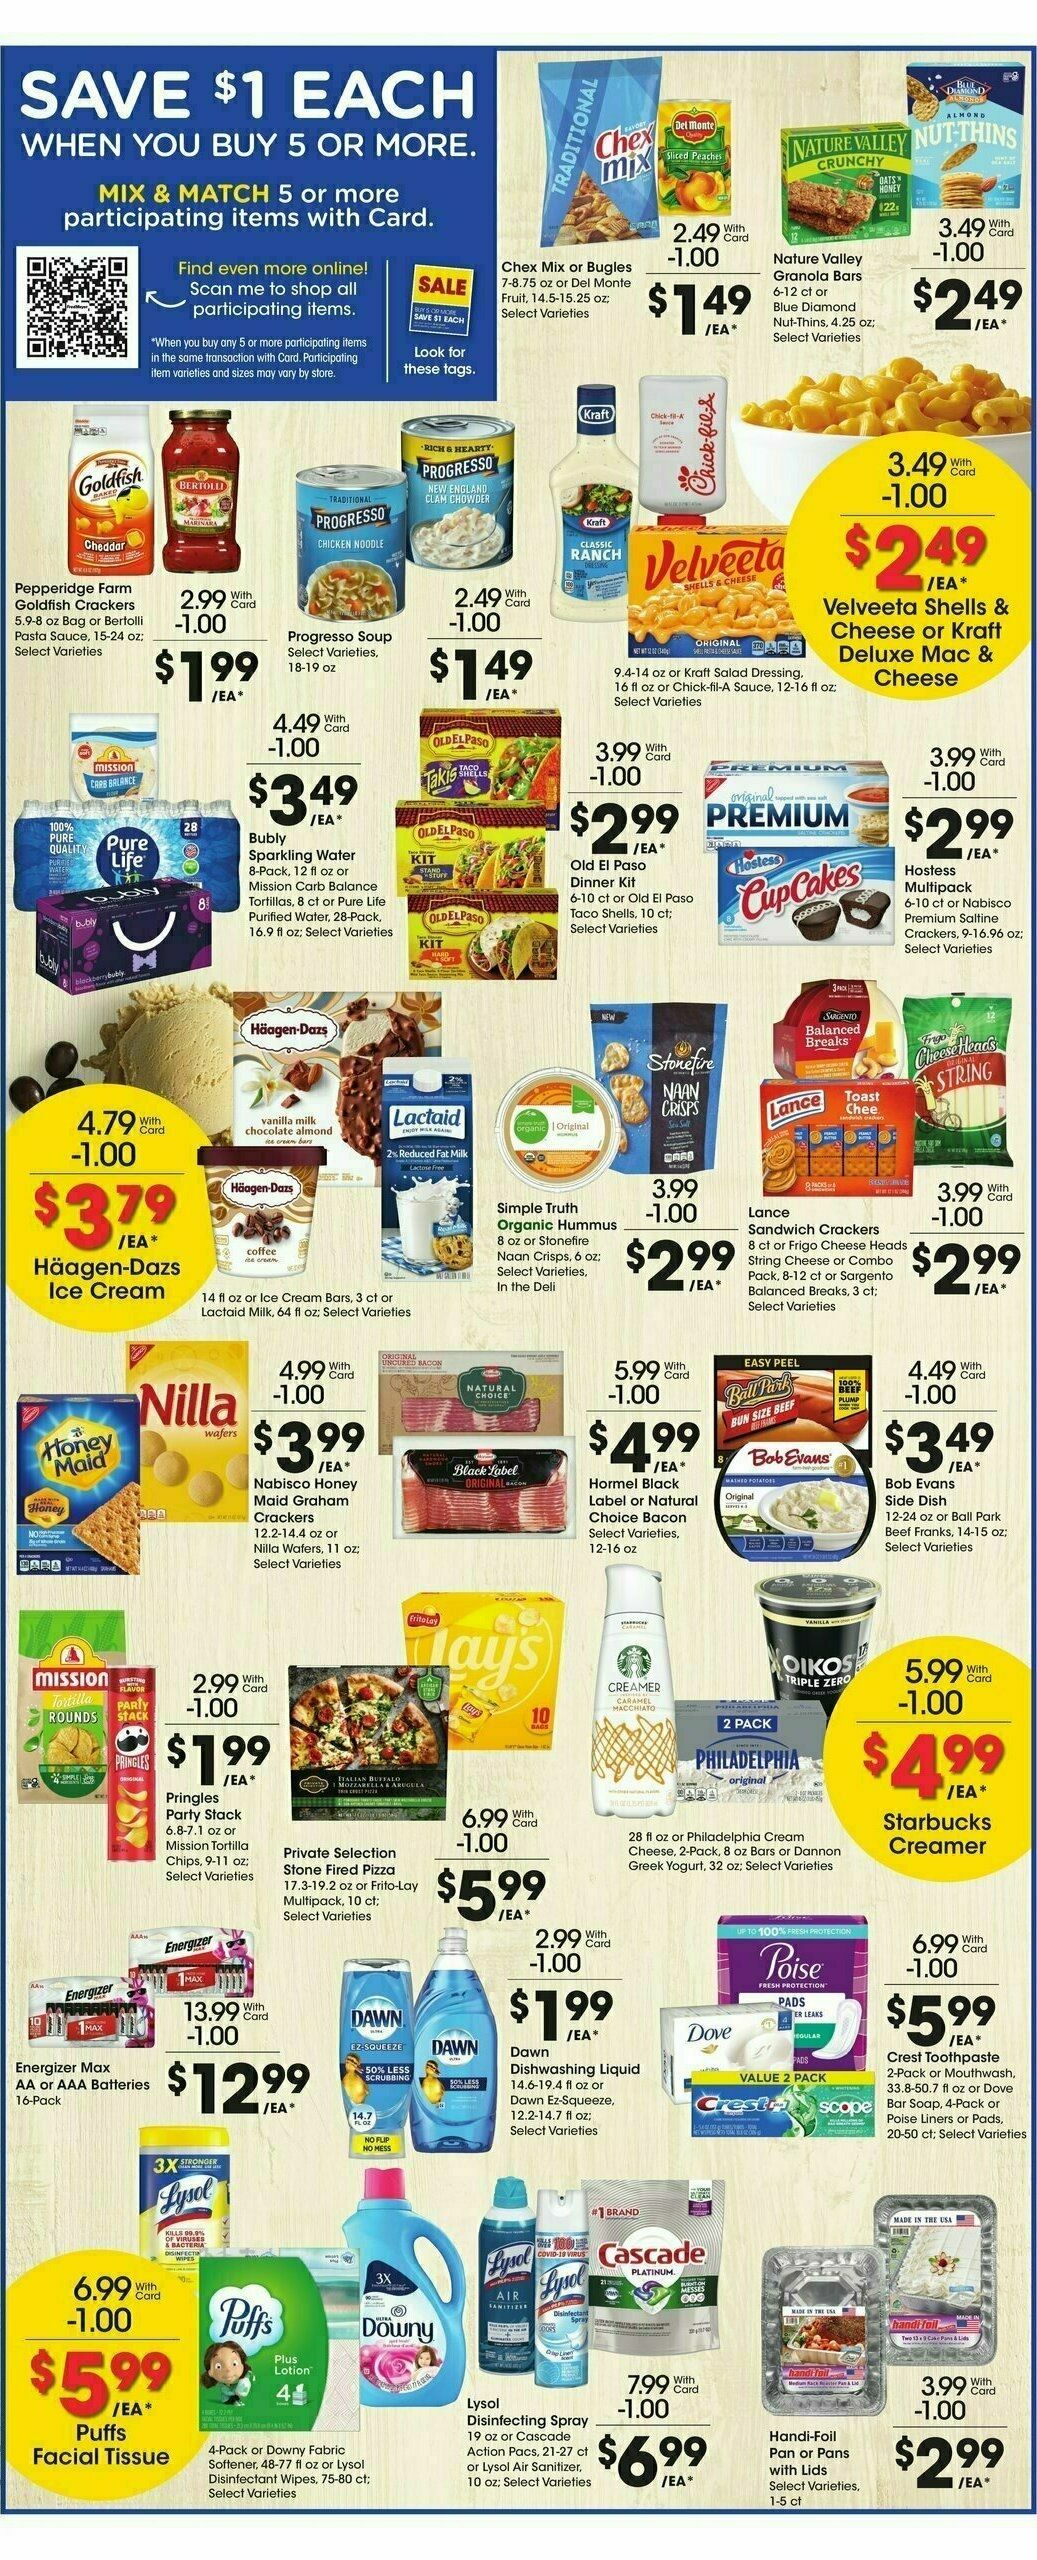 Fred Meyer Weekly Ad from October 18